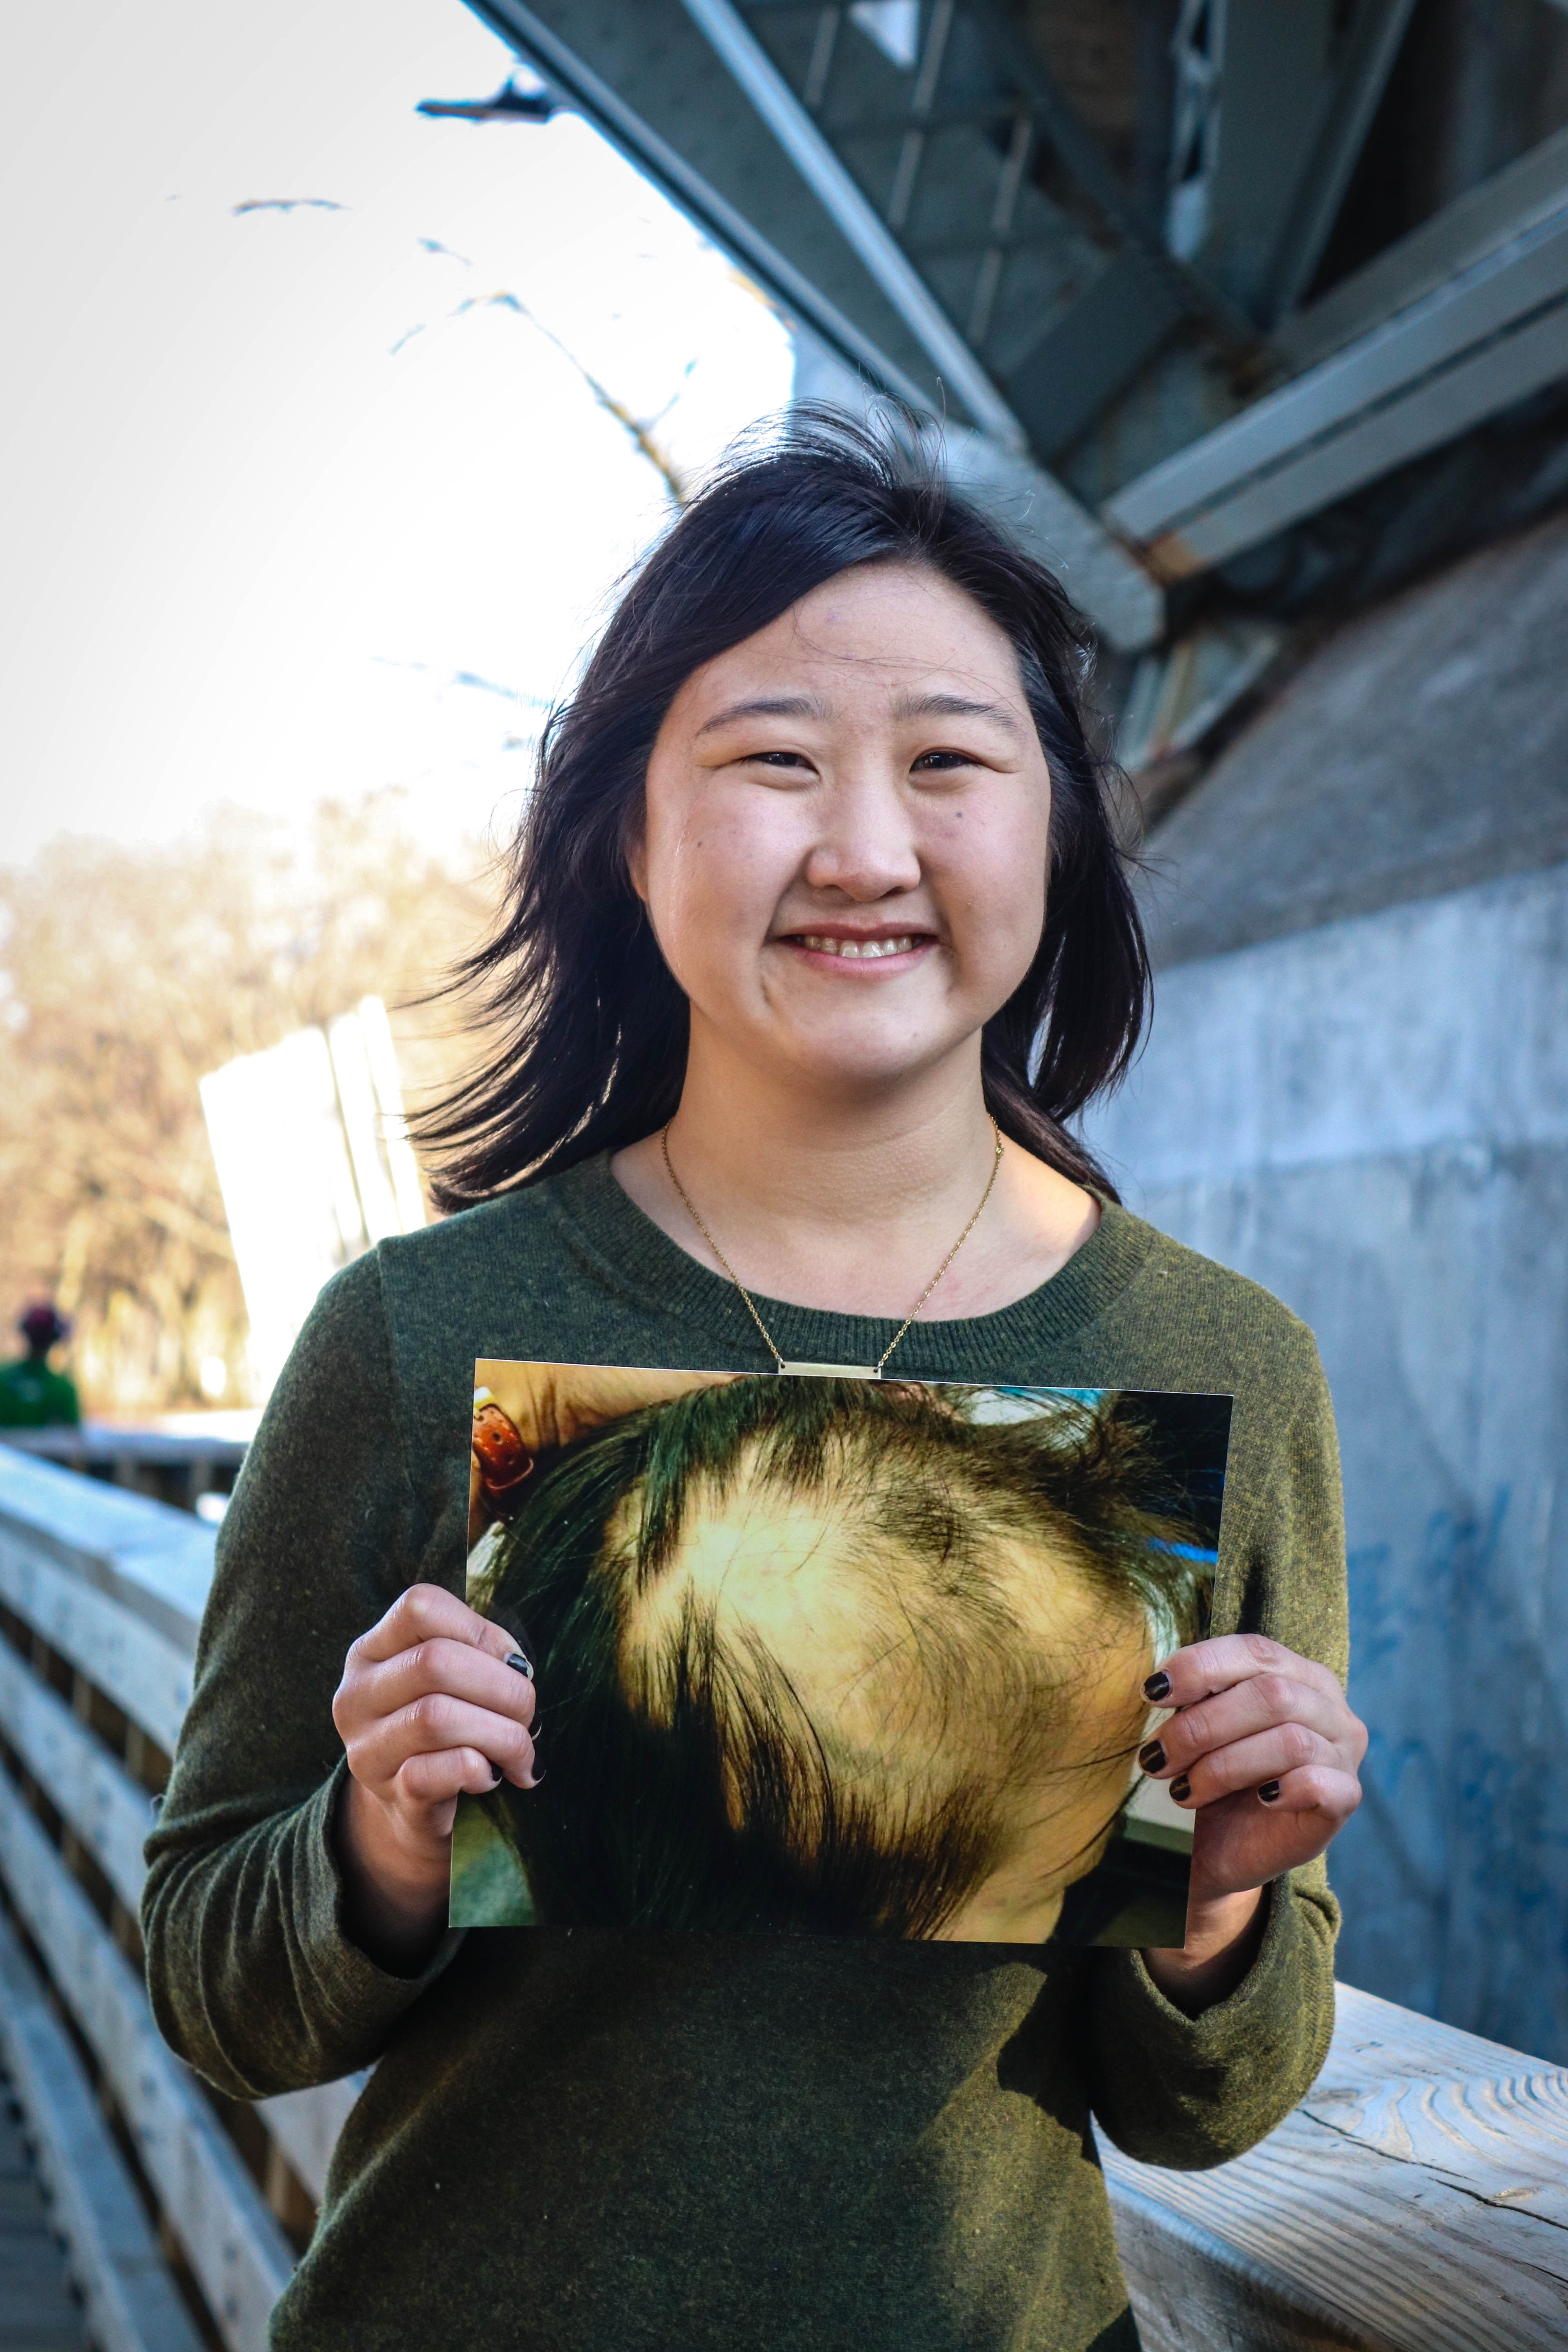 Sarah holding a photo of her scalp when she was balding due to alopecia areata.